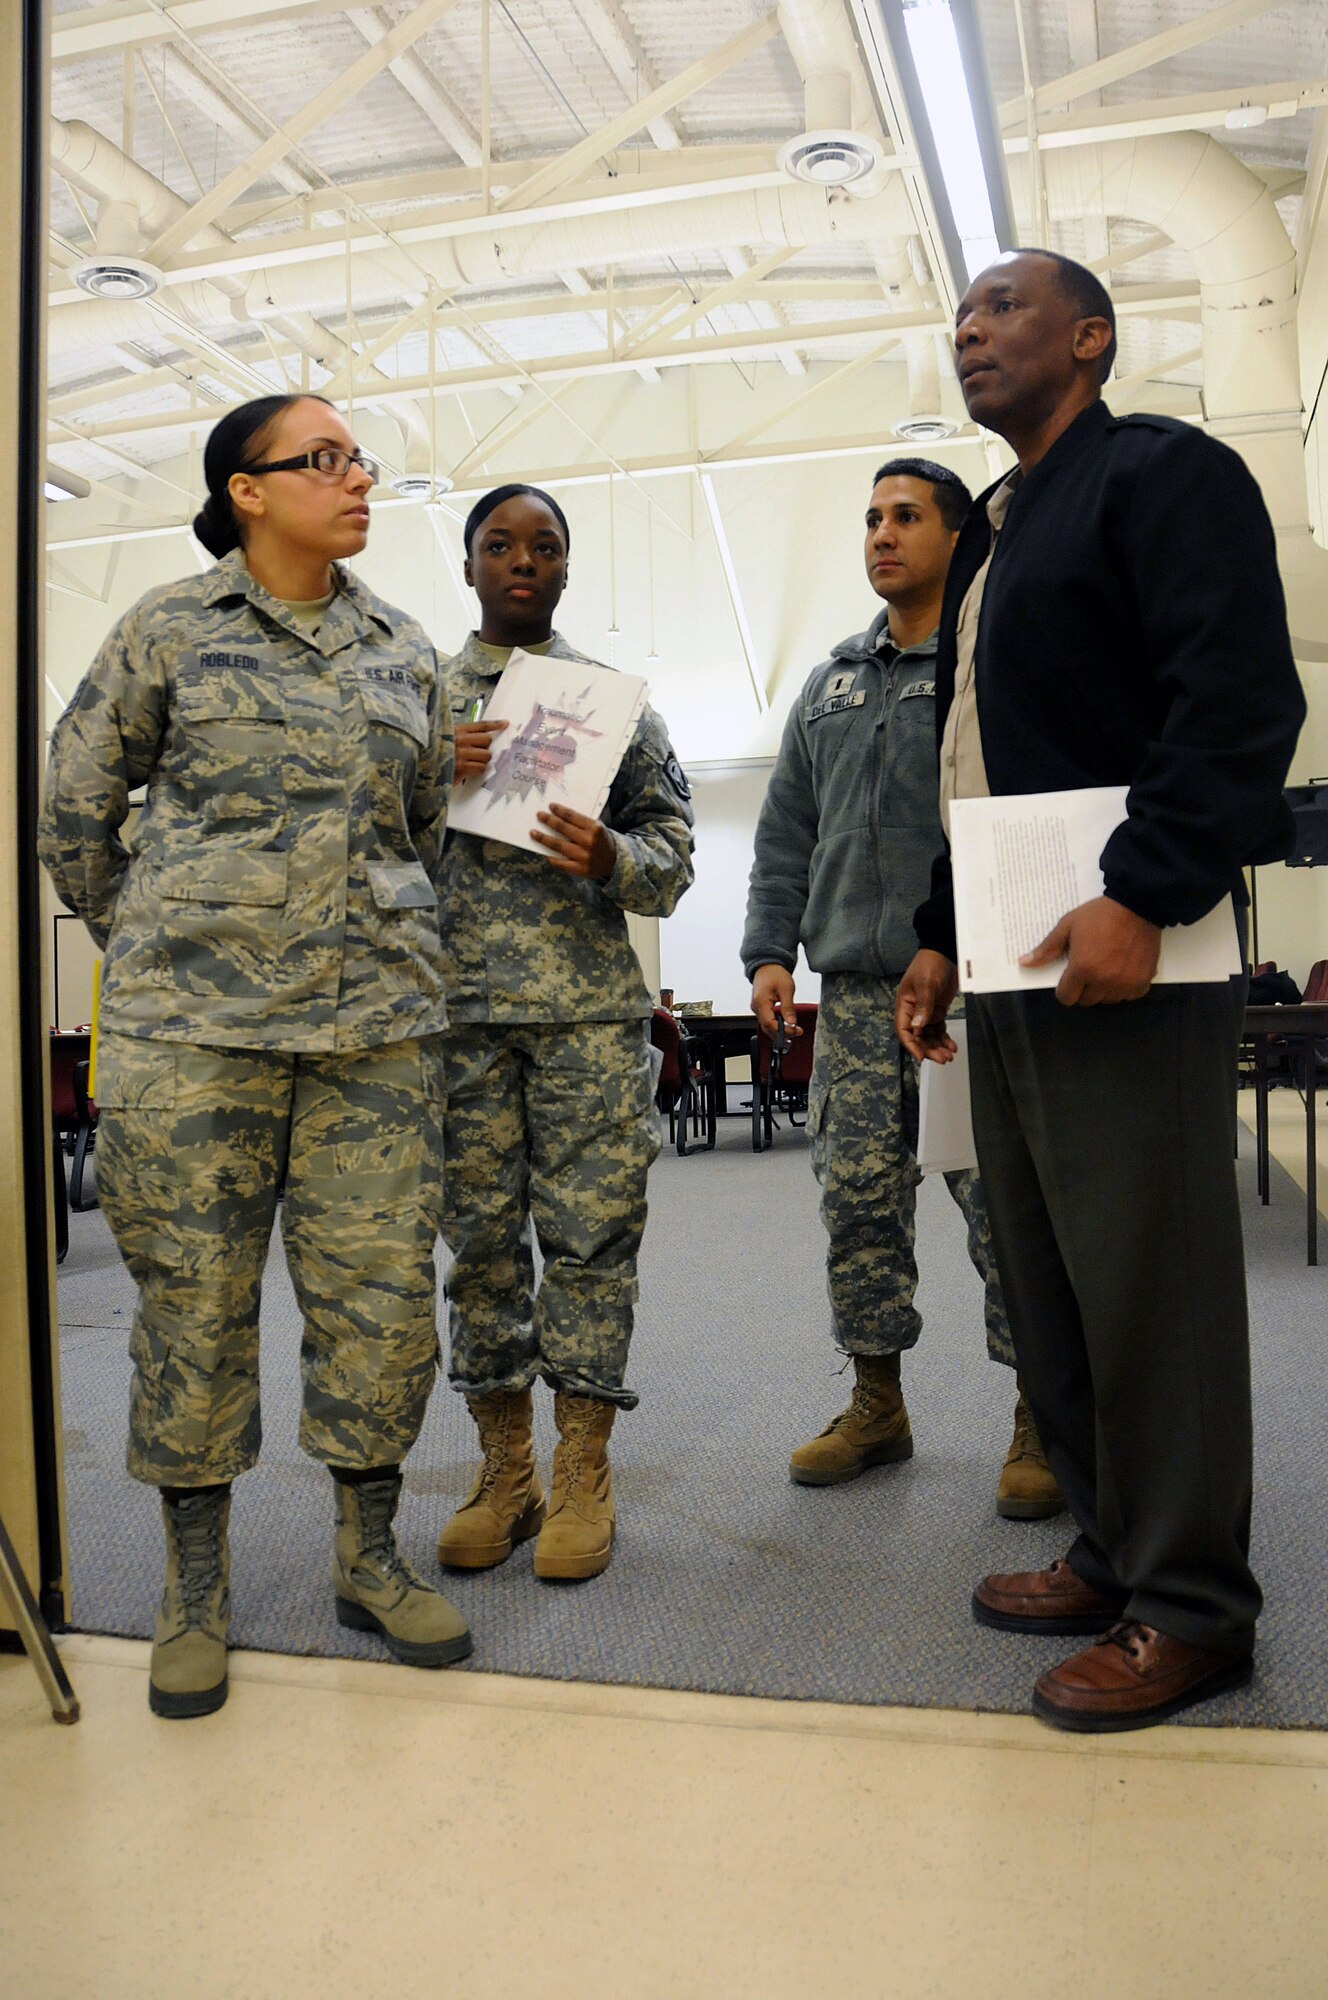 Air Force Staff Sgt. Jennifer Robledo, a future chaplain assistant from the 108th Wing, left, Army Pfc. Mahalia Reevey, a chaplain's assistant from the 117th Combat Sustainment Support Battalion, center left, Army 1st Lt. Joseph Del Valle, a chaplain from the 102nd Cavalry Regimnet, and an instructor from (AMEDDC), are waiting to start the scenario discussion during the Traumatic Event Management Course Jan. 16, 2015, at Joint Base McGuire-Dix-Lakehurst, N.J. The Army's TEM course was a week long and focused on unit cohesion and effectiveness to help manage crisis situations. The course used group activities and role playing to reinforce the lessons. At the end of the week, the students are able to take what they learned and bring it back to their units. (U.S. Air National Guard Photo by Airman 1st Class Julia Pyun/Released)